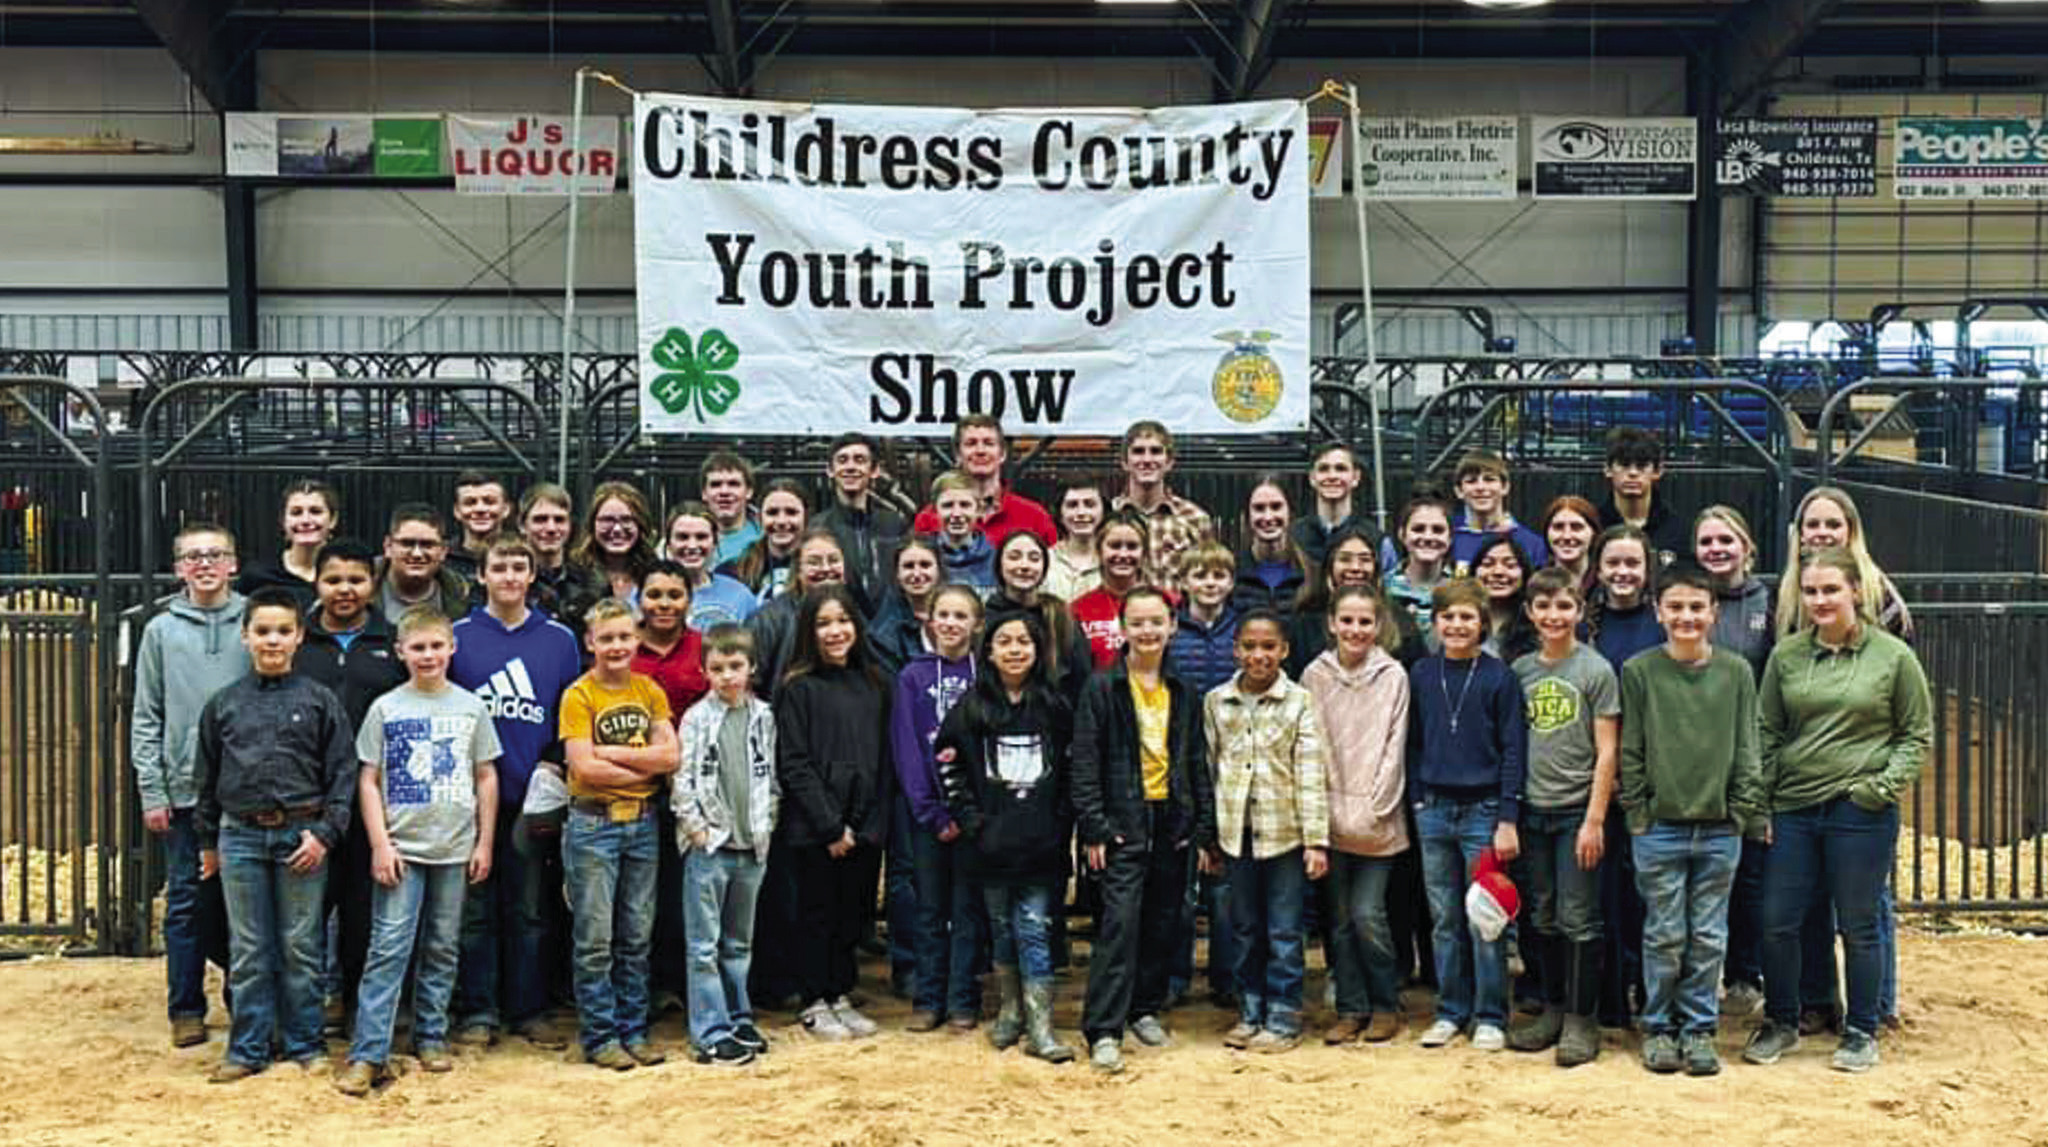 Childress County Youth Project Show over 50 exhibitors, 100